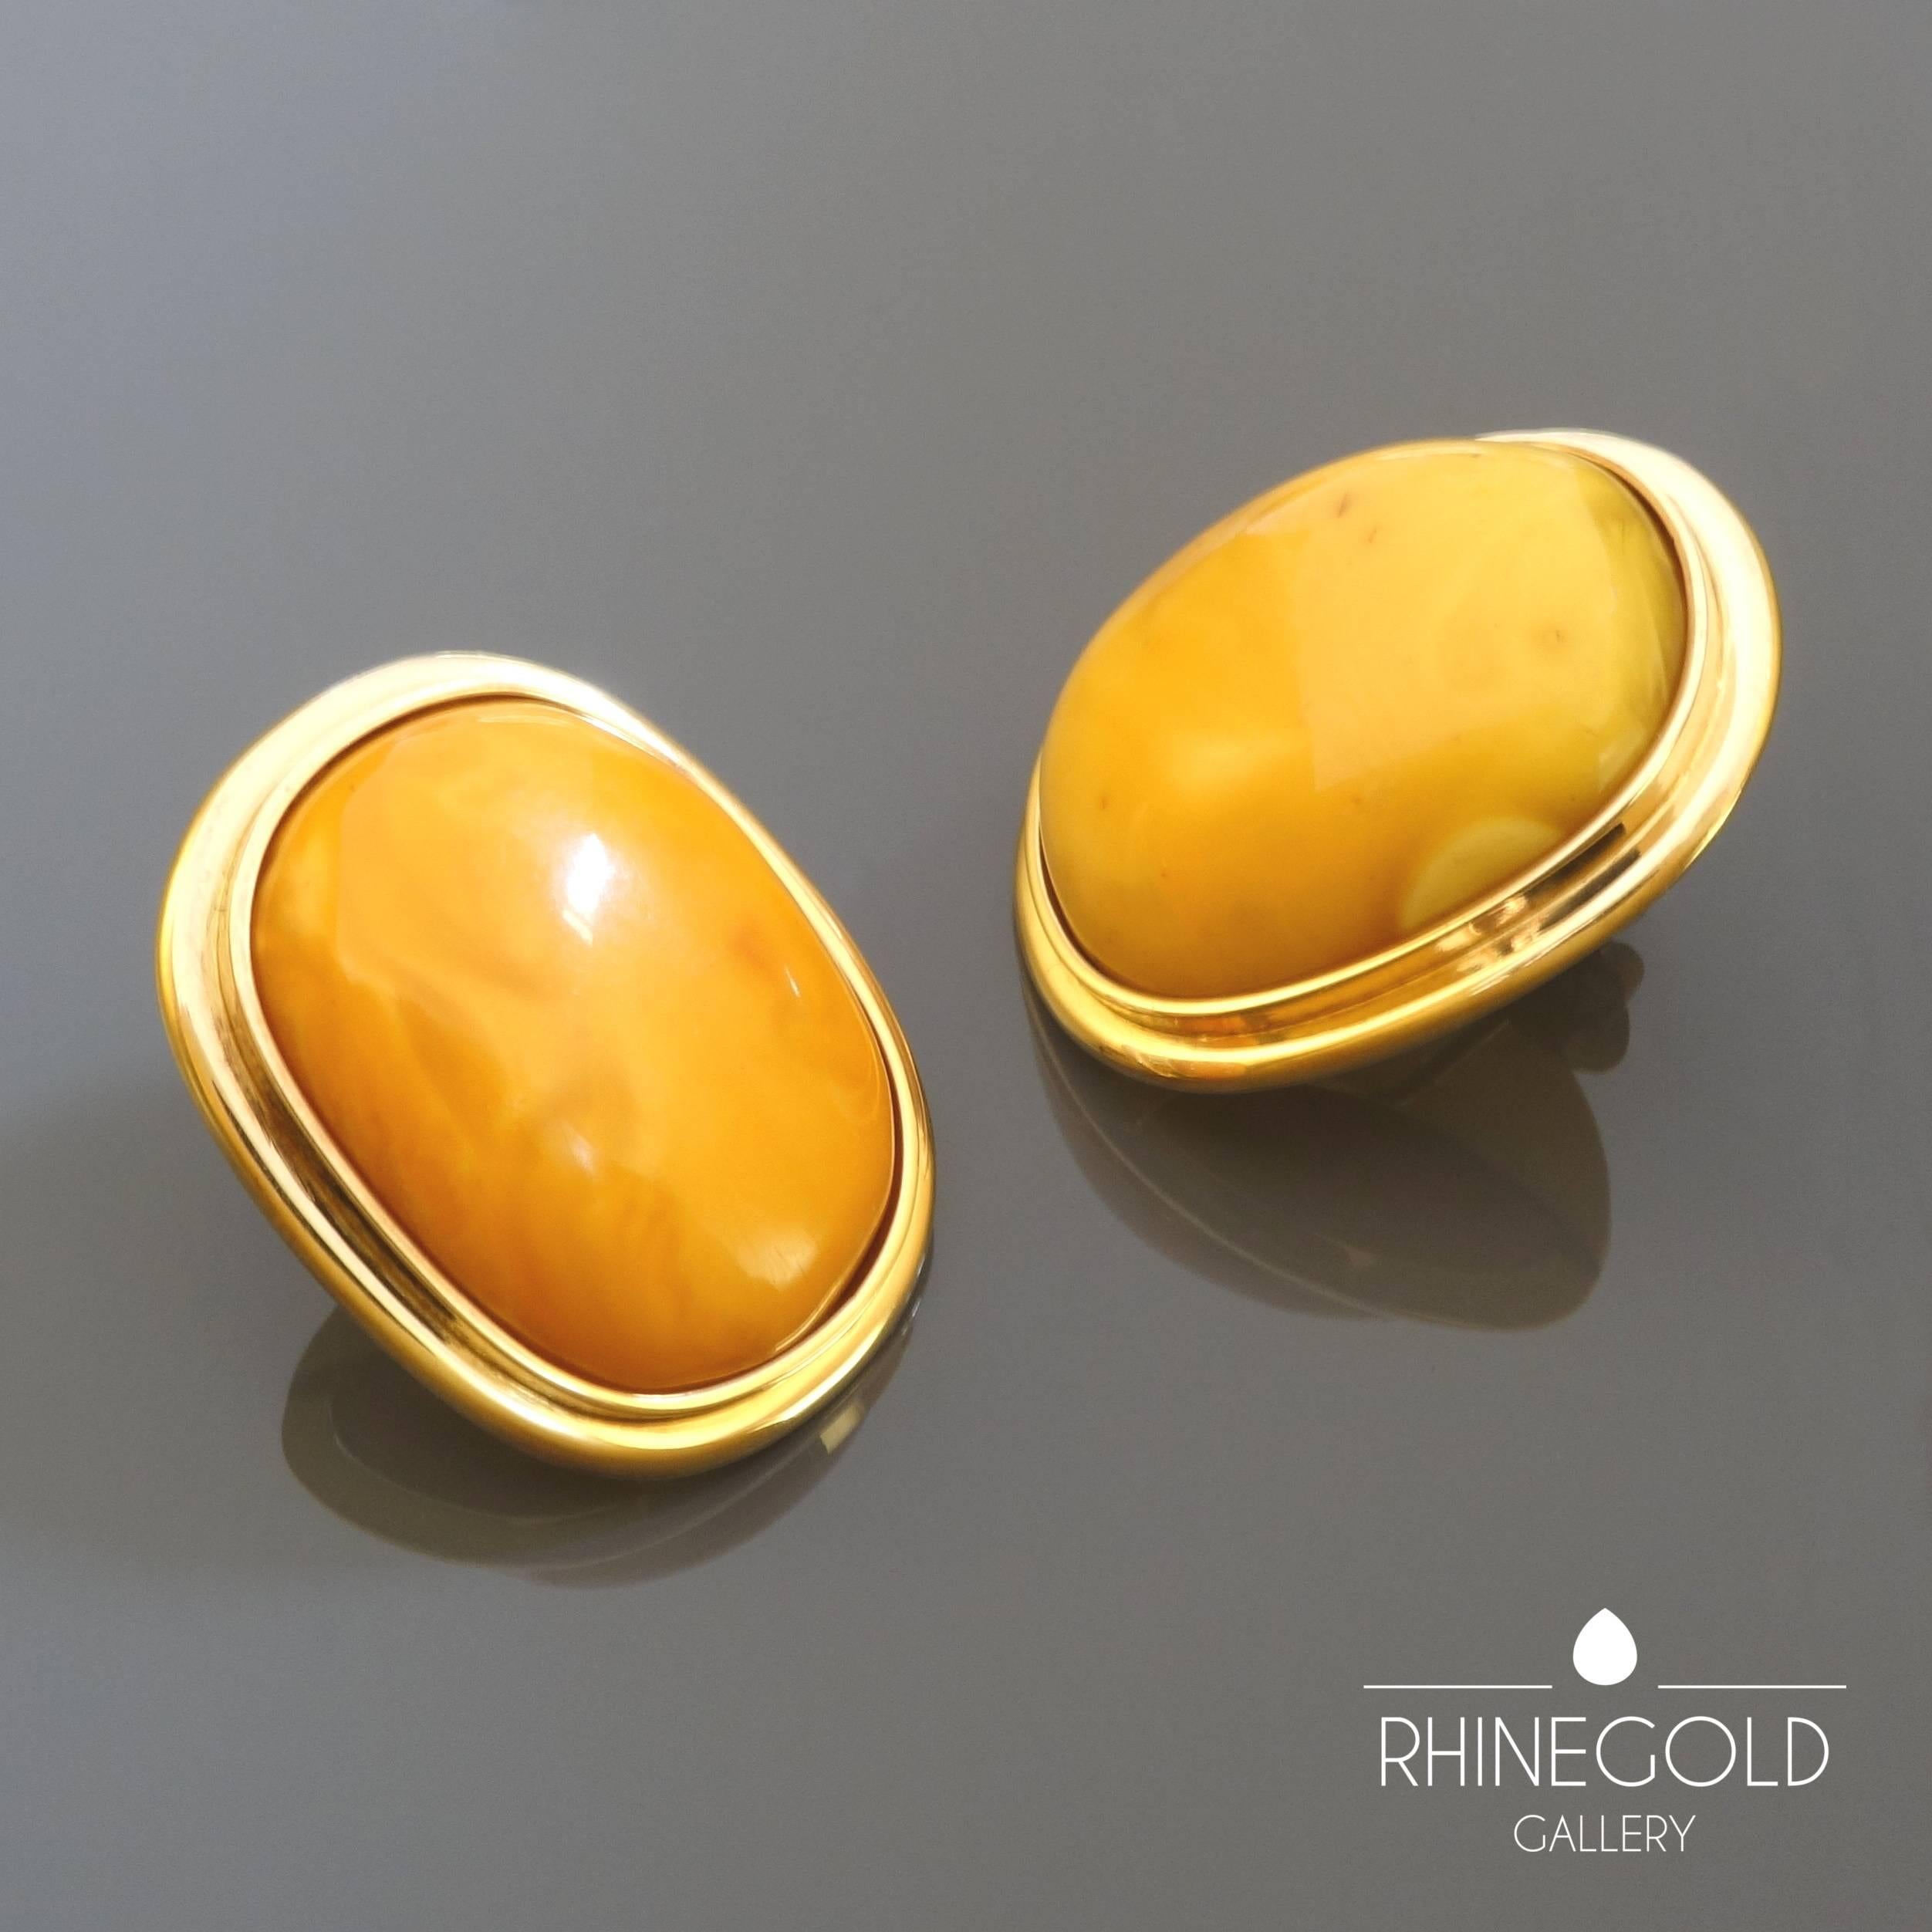 Helmut Laich A Pair of Large Modern Butterscotch Amber Gold Earrings
18k yellow gold, natural amber
Height 3.5 cm, width 2.85 cm (approx. 1 3/8” by 1 1/8”)
Weight approx. 33 grams
Marks: gold content mark ‘750’ for 18k gold; maker’s mark
Germany,